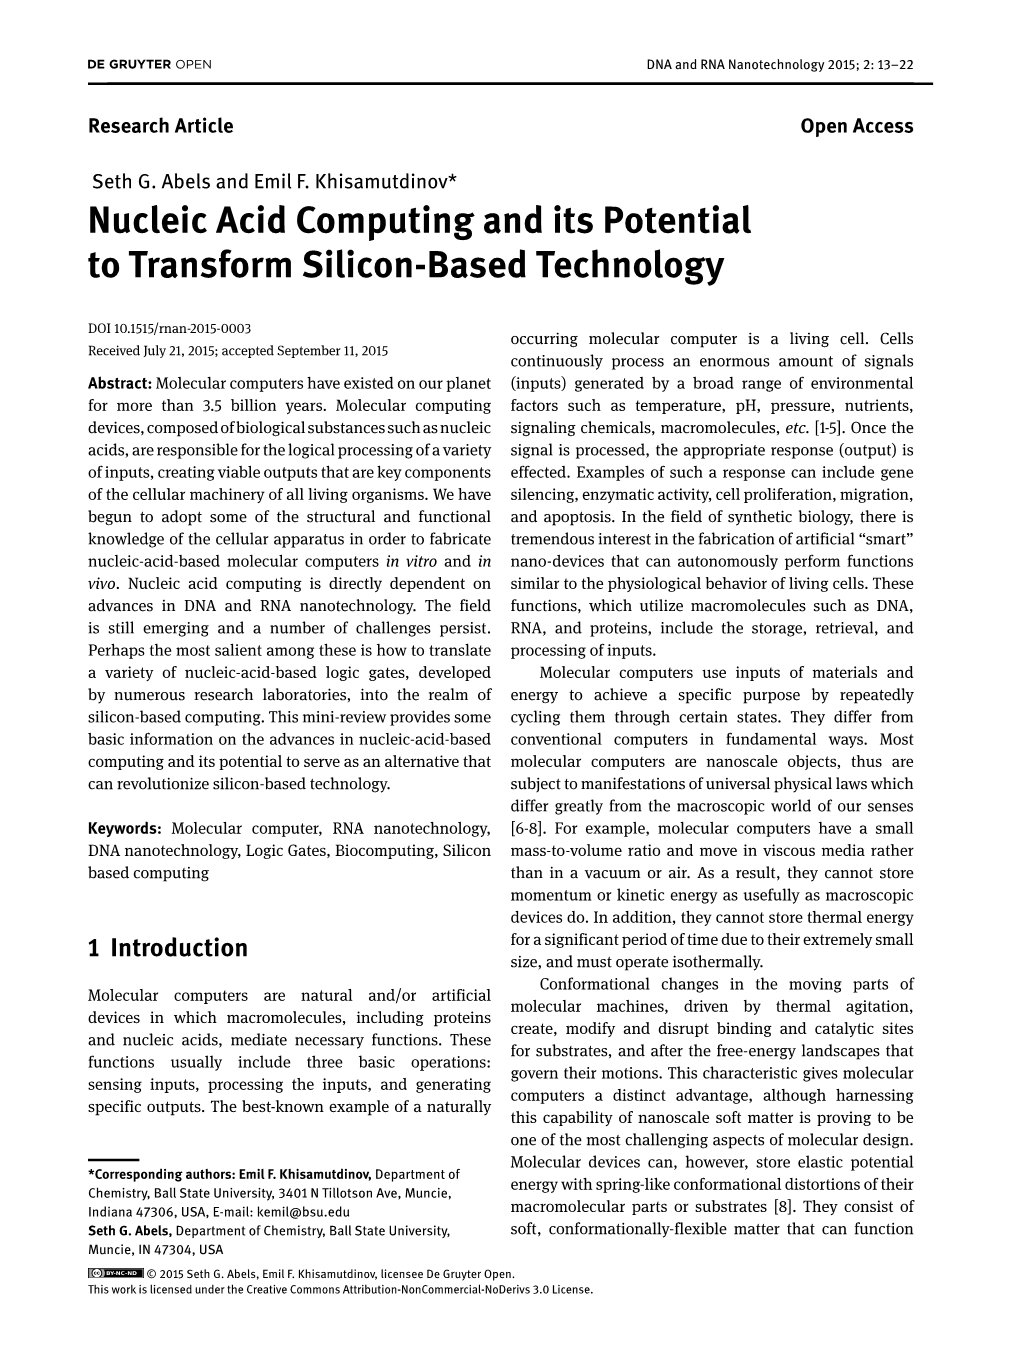 Nucleic Acid Computing and Its Potential to Transform Silicon-Based Technology